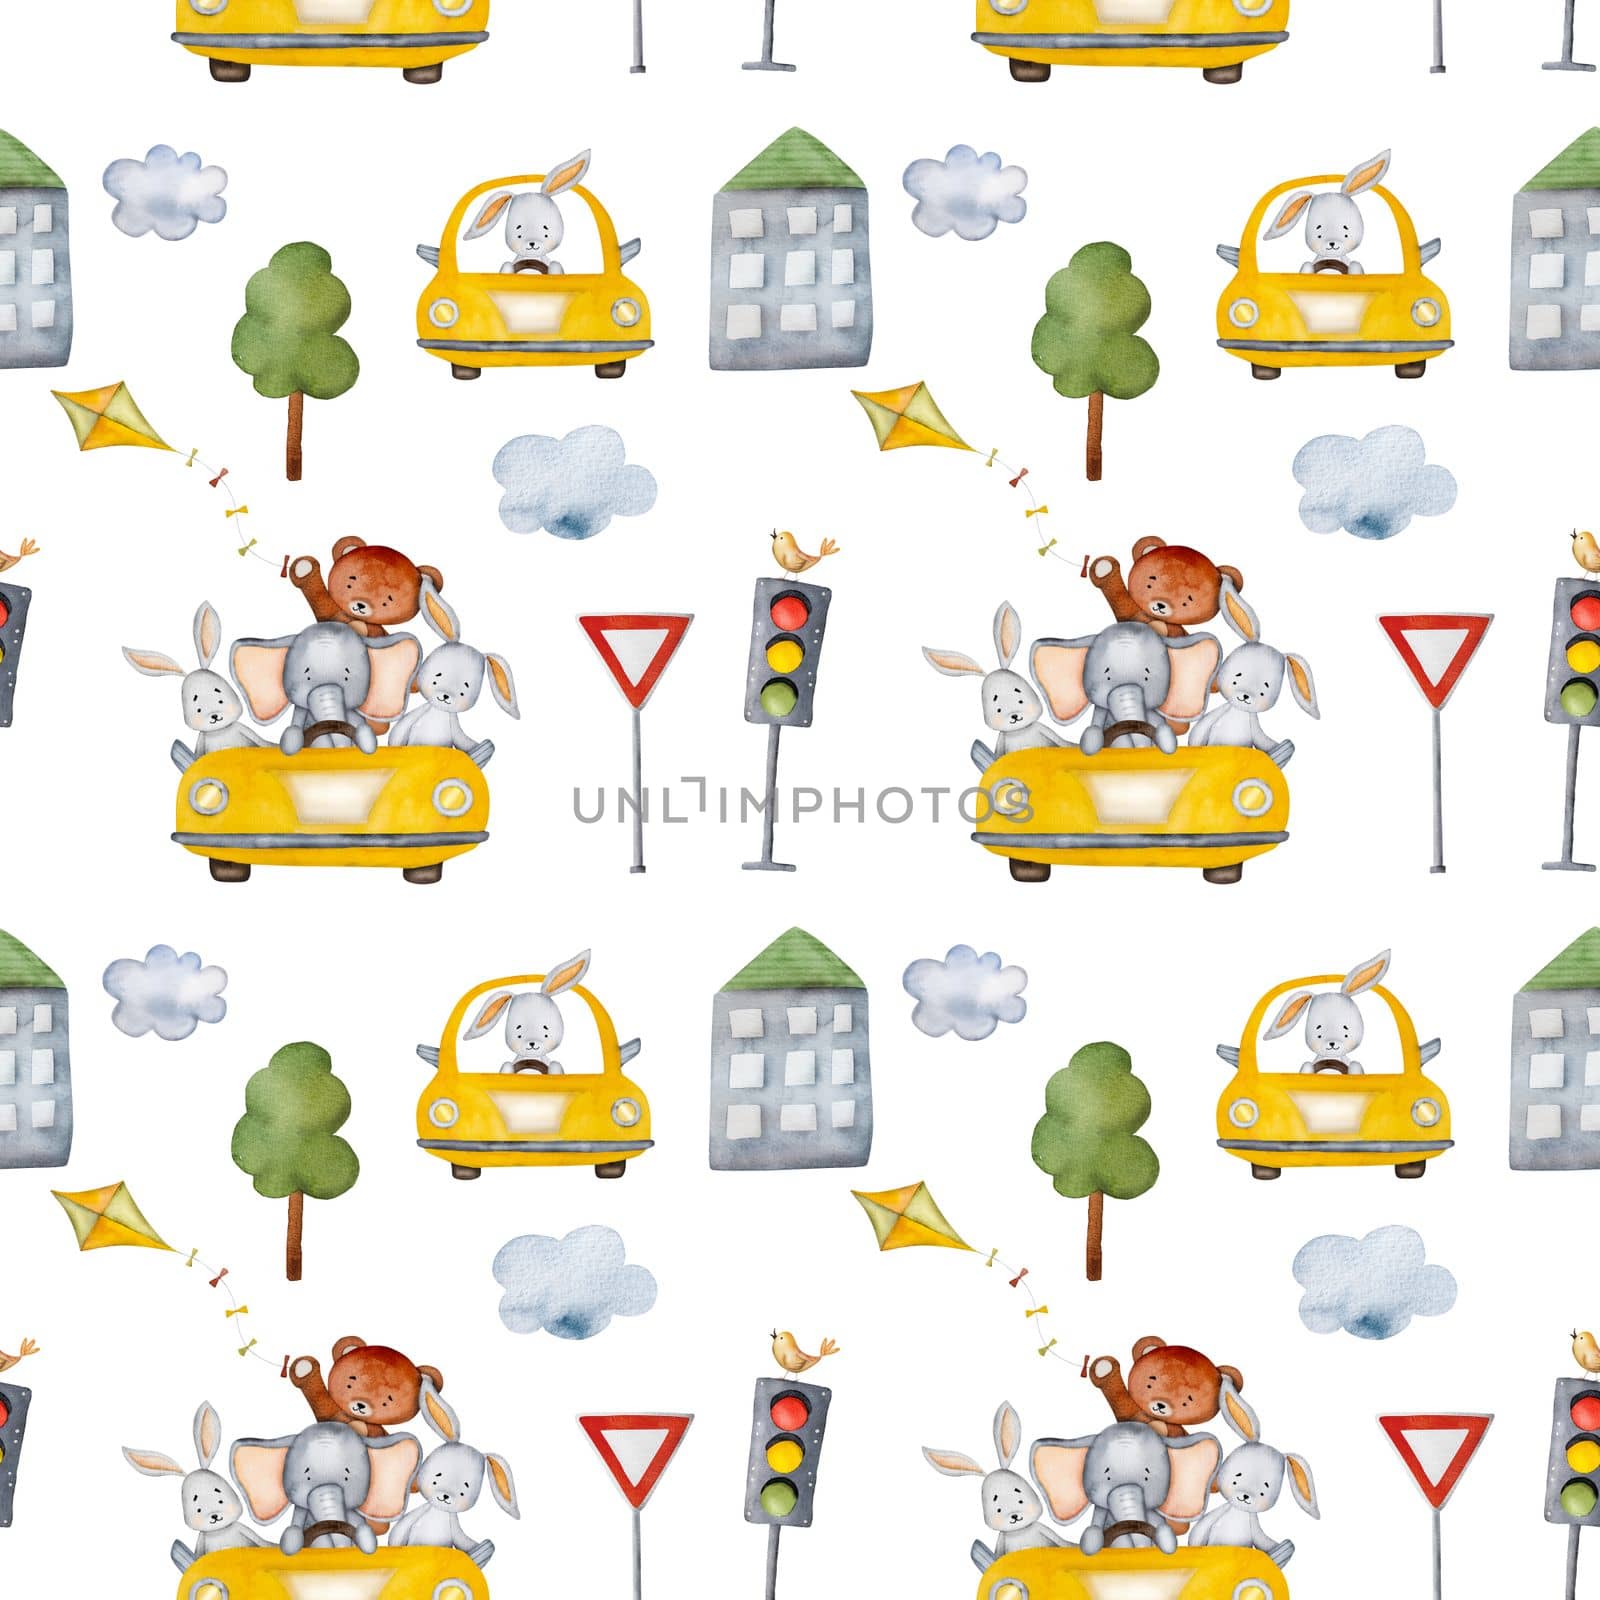 Cartoon bear, elephant and bunny in yellow car and buildings watercolor seamless pattern. Automobile transportation with cute animals, traffic lights and trees aquarelle travel illustration